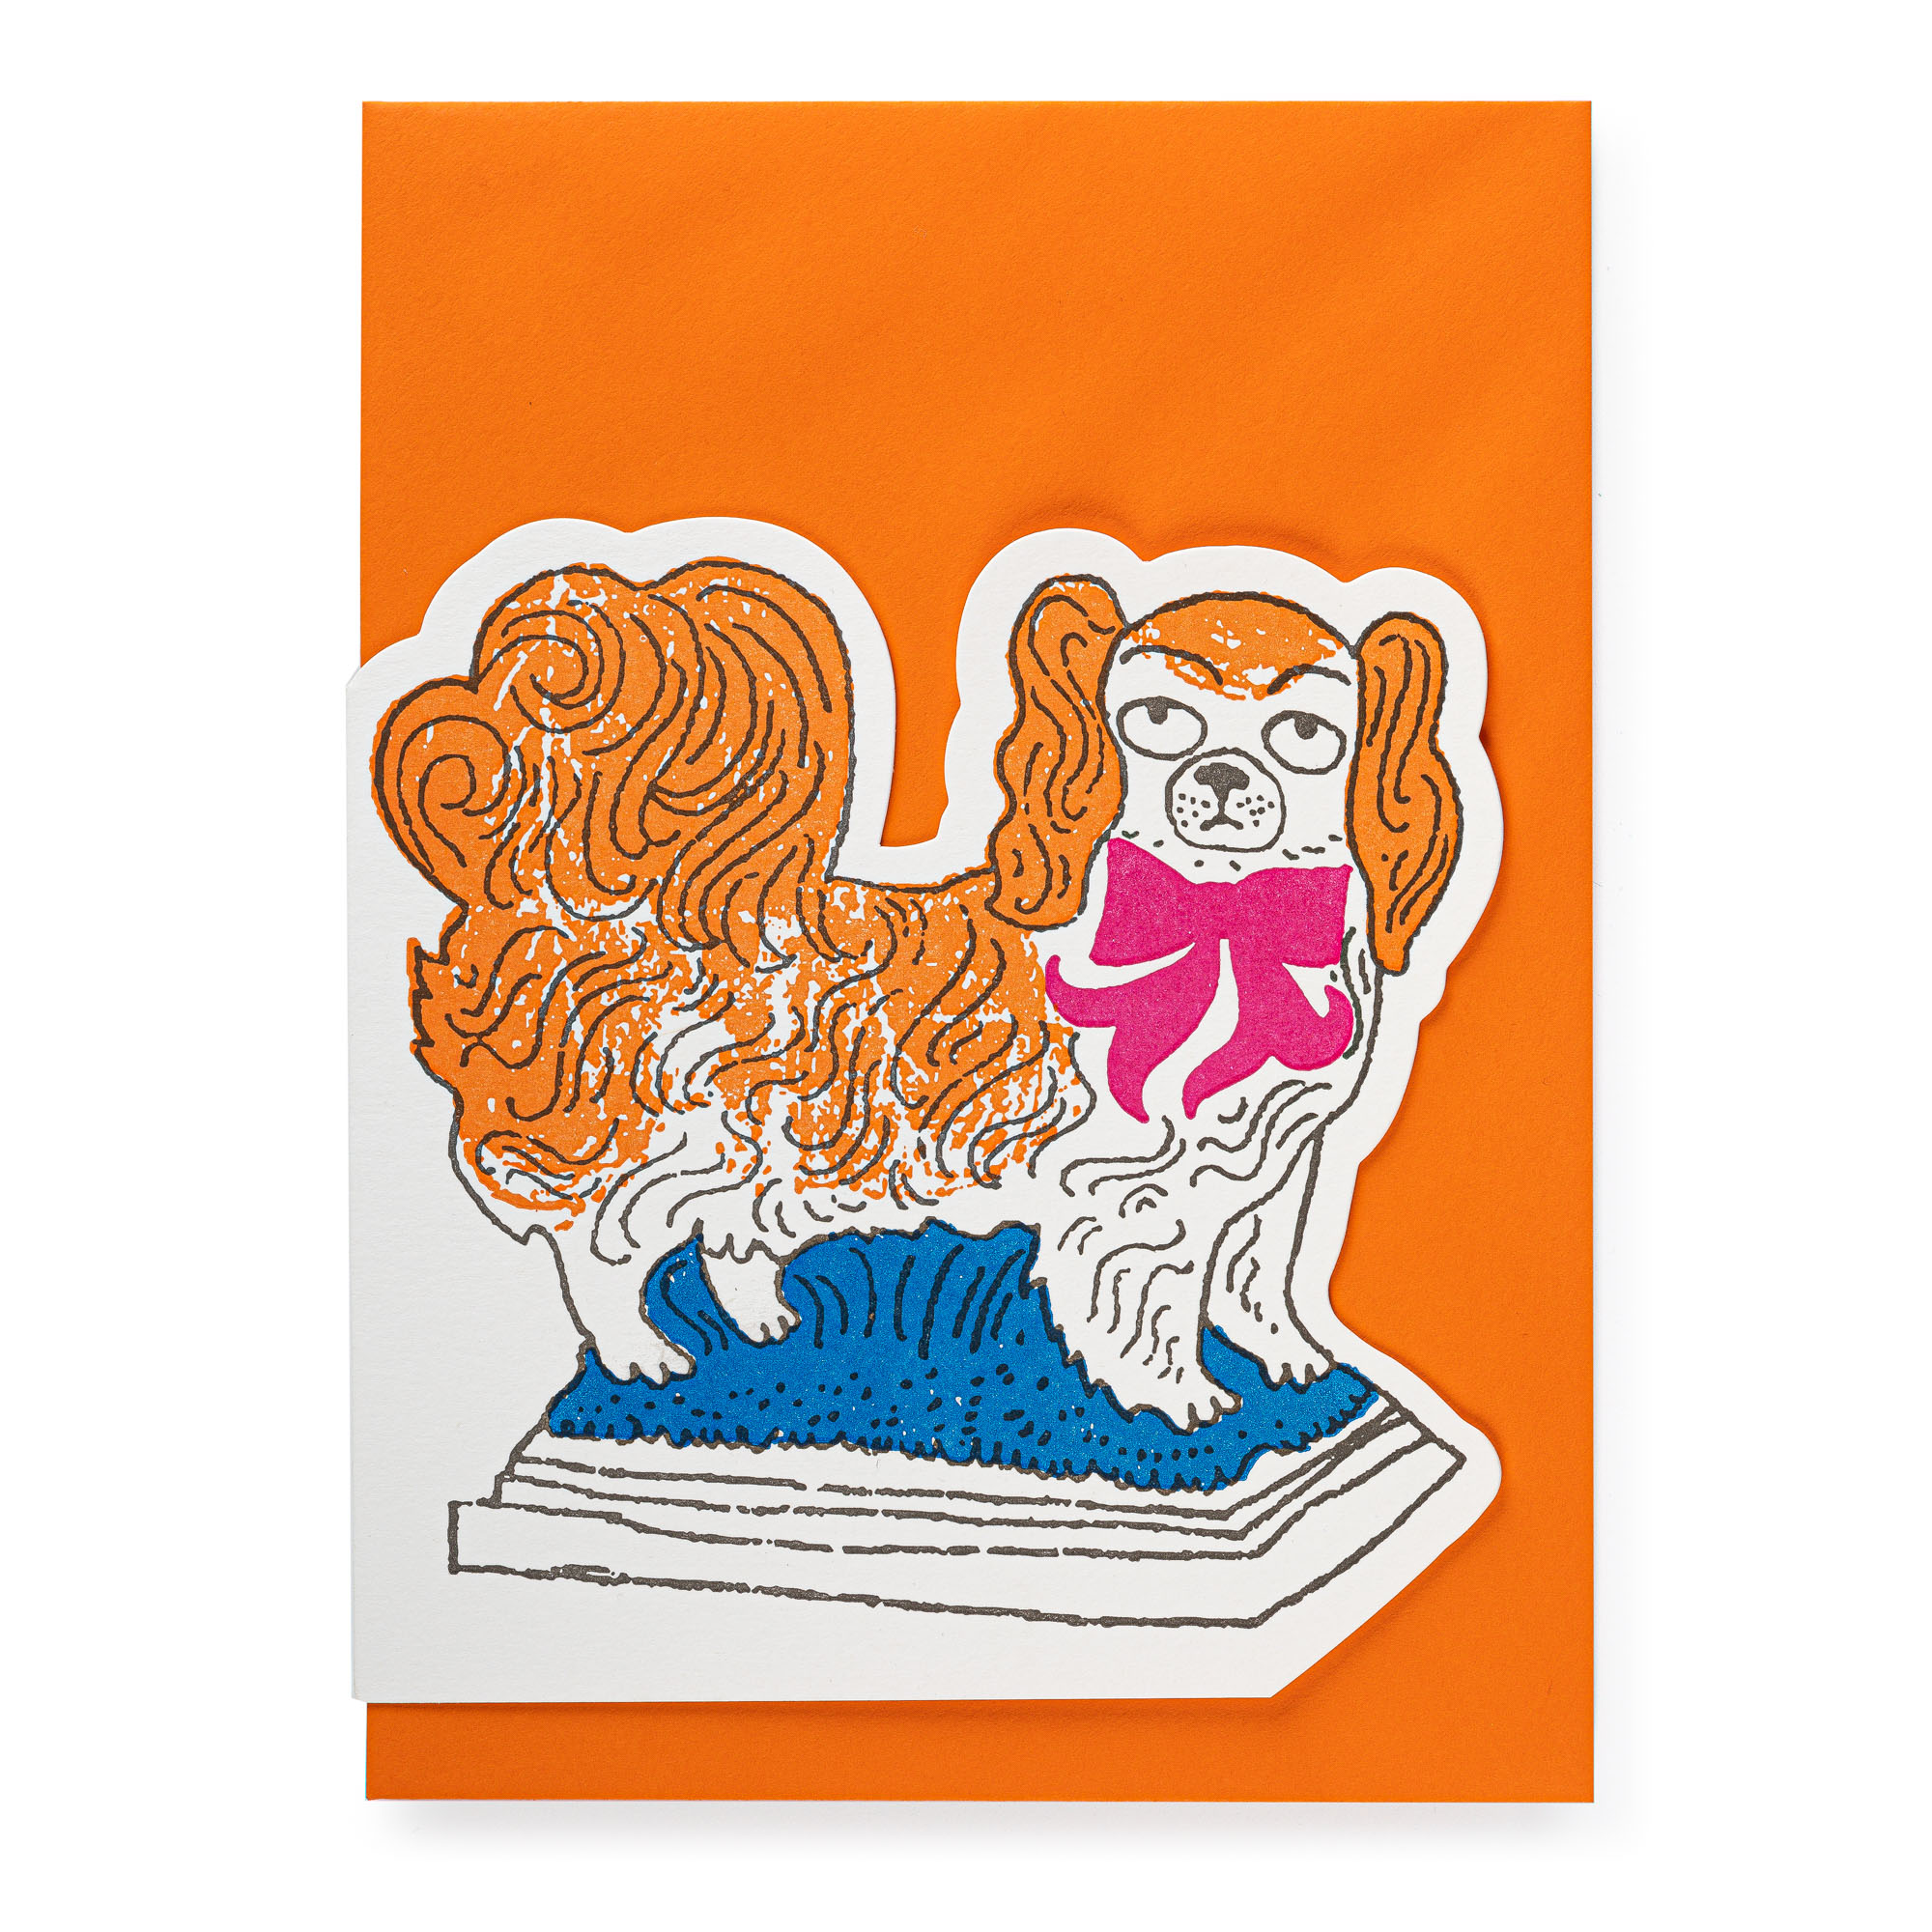 Pekinese - Cut-out Cards - Charlotte Farmer - from Archivist Gallery 